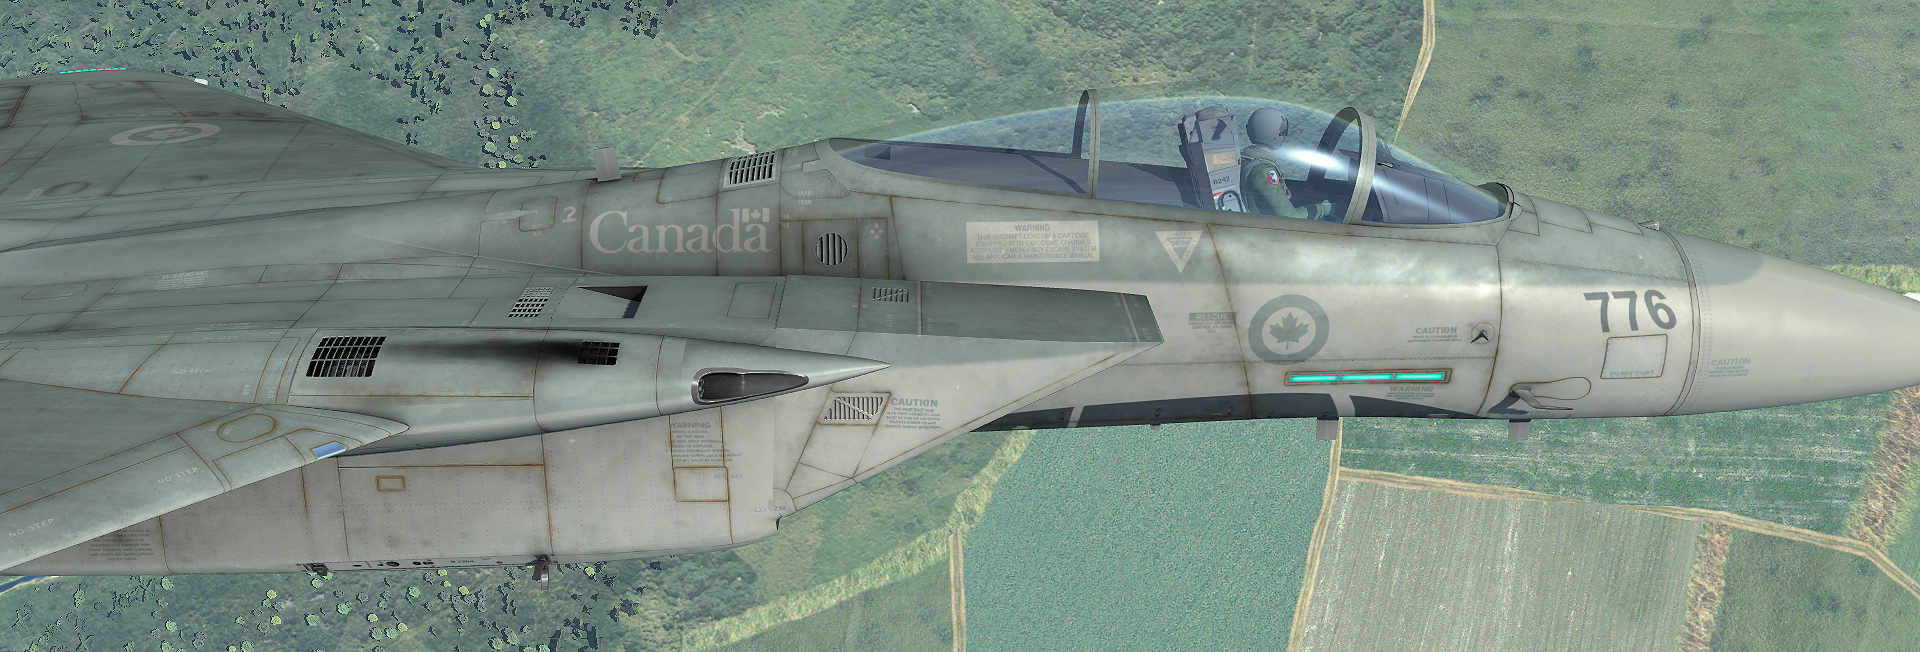 F-15C - Fictional RCAF Low Visibility Skin (Weathered)